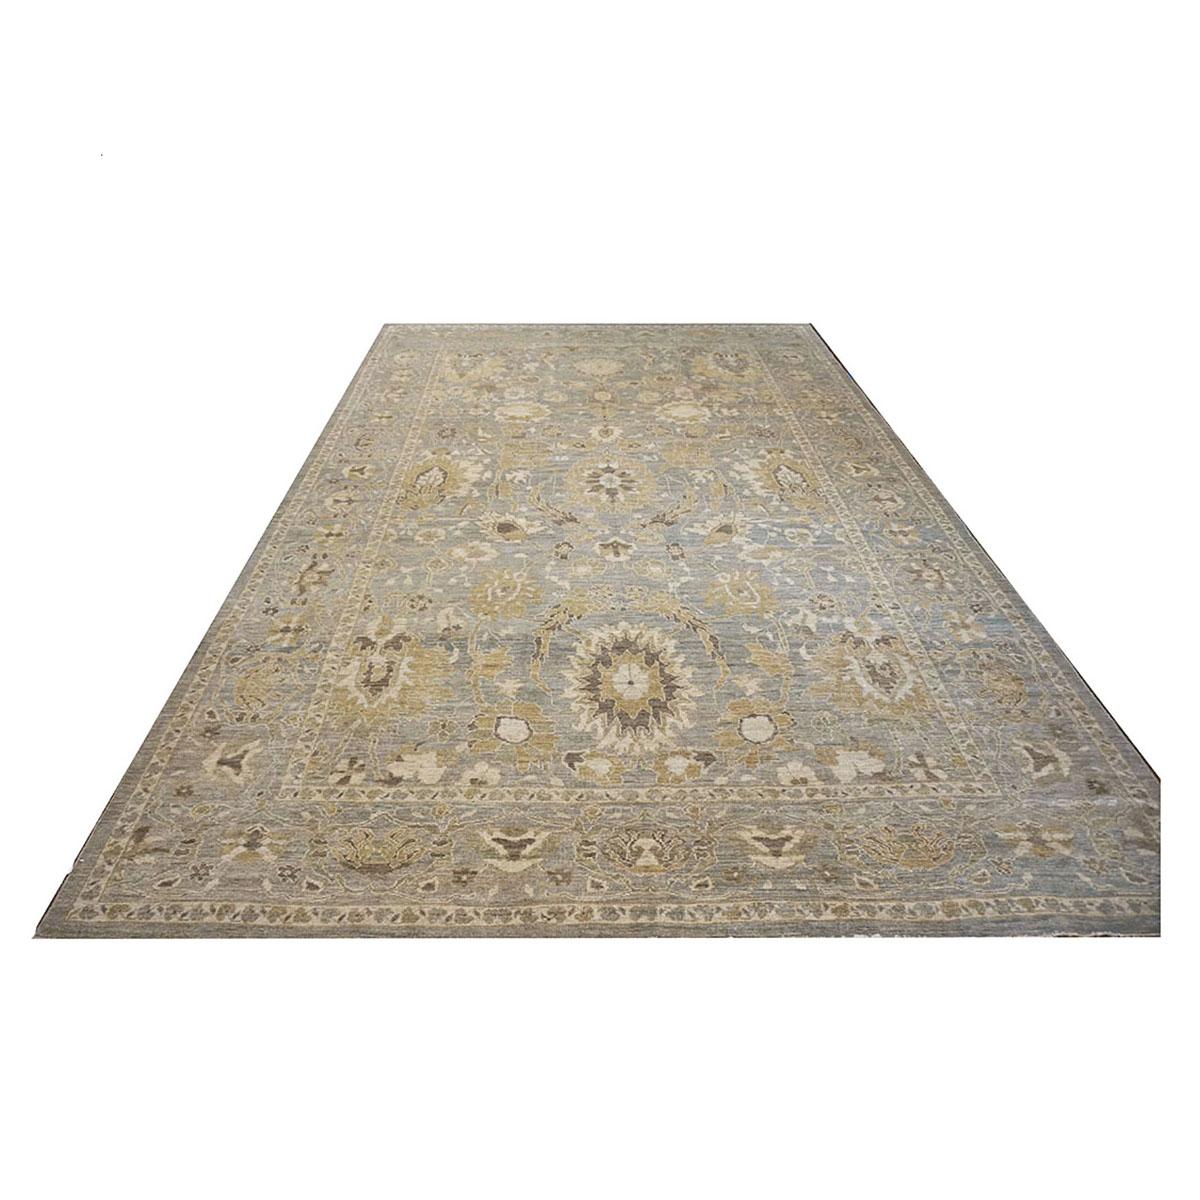  Ashly Fine Rugs presents an antique recreation of an original Persian Sultanabad. Part of our own previous production, this antique recreation was thought of and created in-house and 100% handmade in Persia by master weavers. Sultanabads are